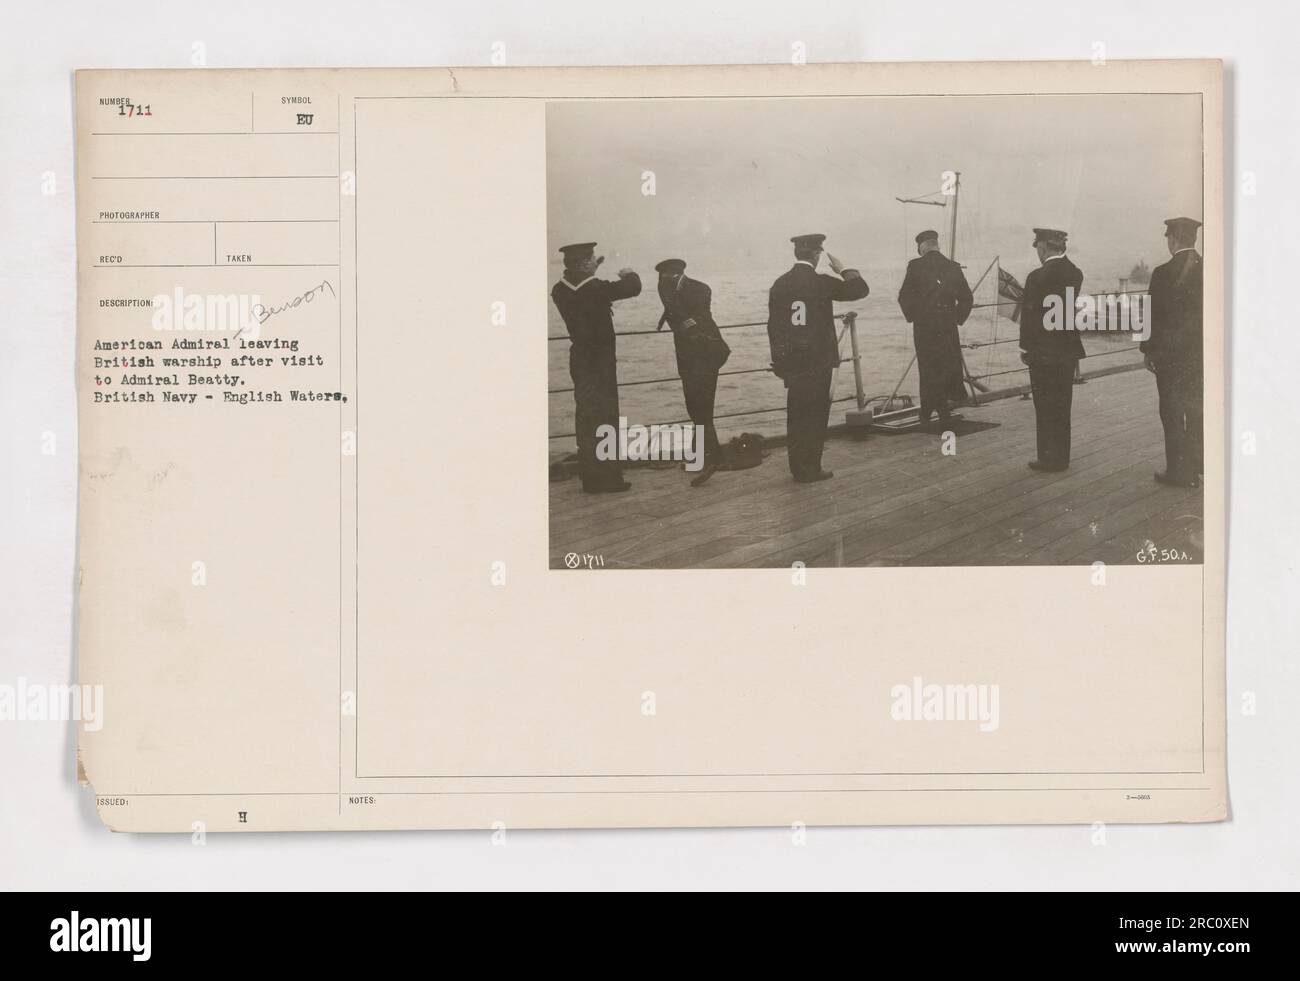 Admiral Benson boarding his ship after visiting the British flagship in English waters during World War One. The photo, taken by an American photographer, shows the exchange of information and coordination between the American and British navies. Benson is seen leaving the British warship after meeting with Admiral Beatty. Stock Photo